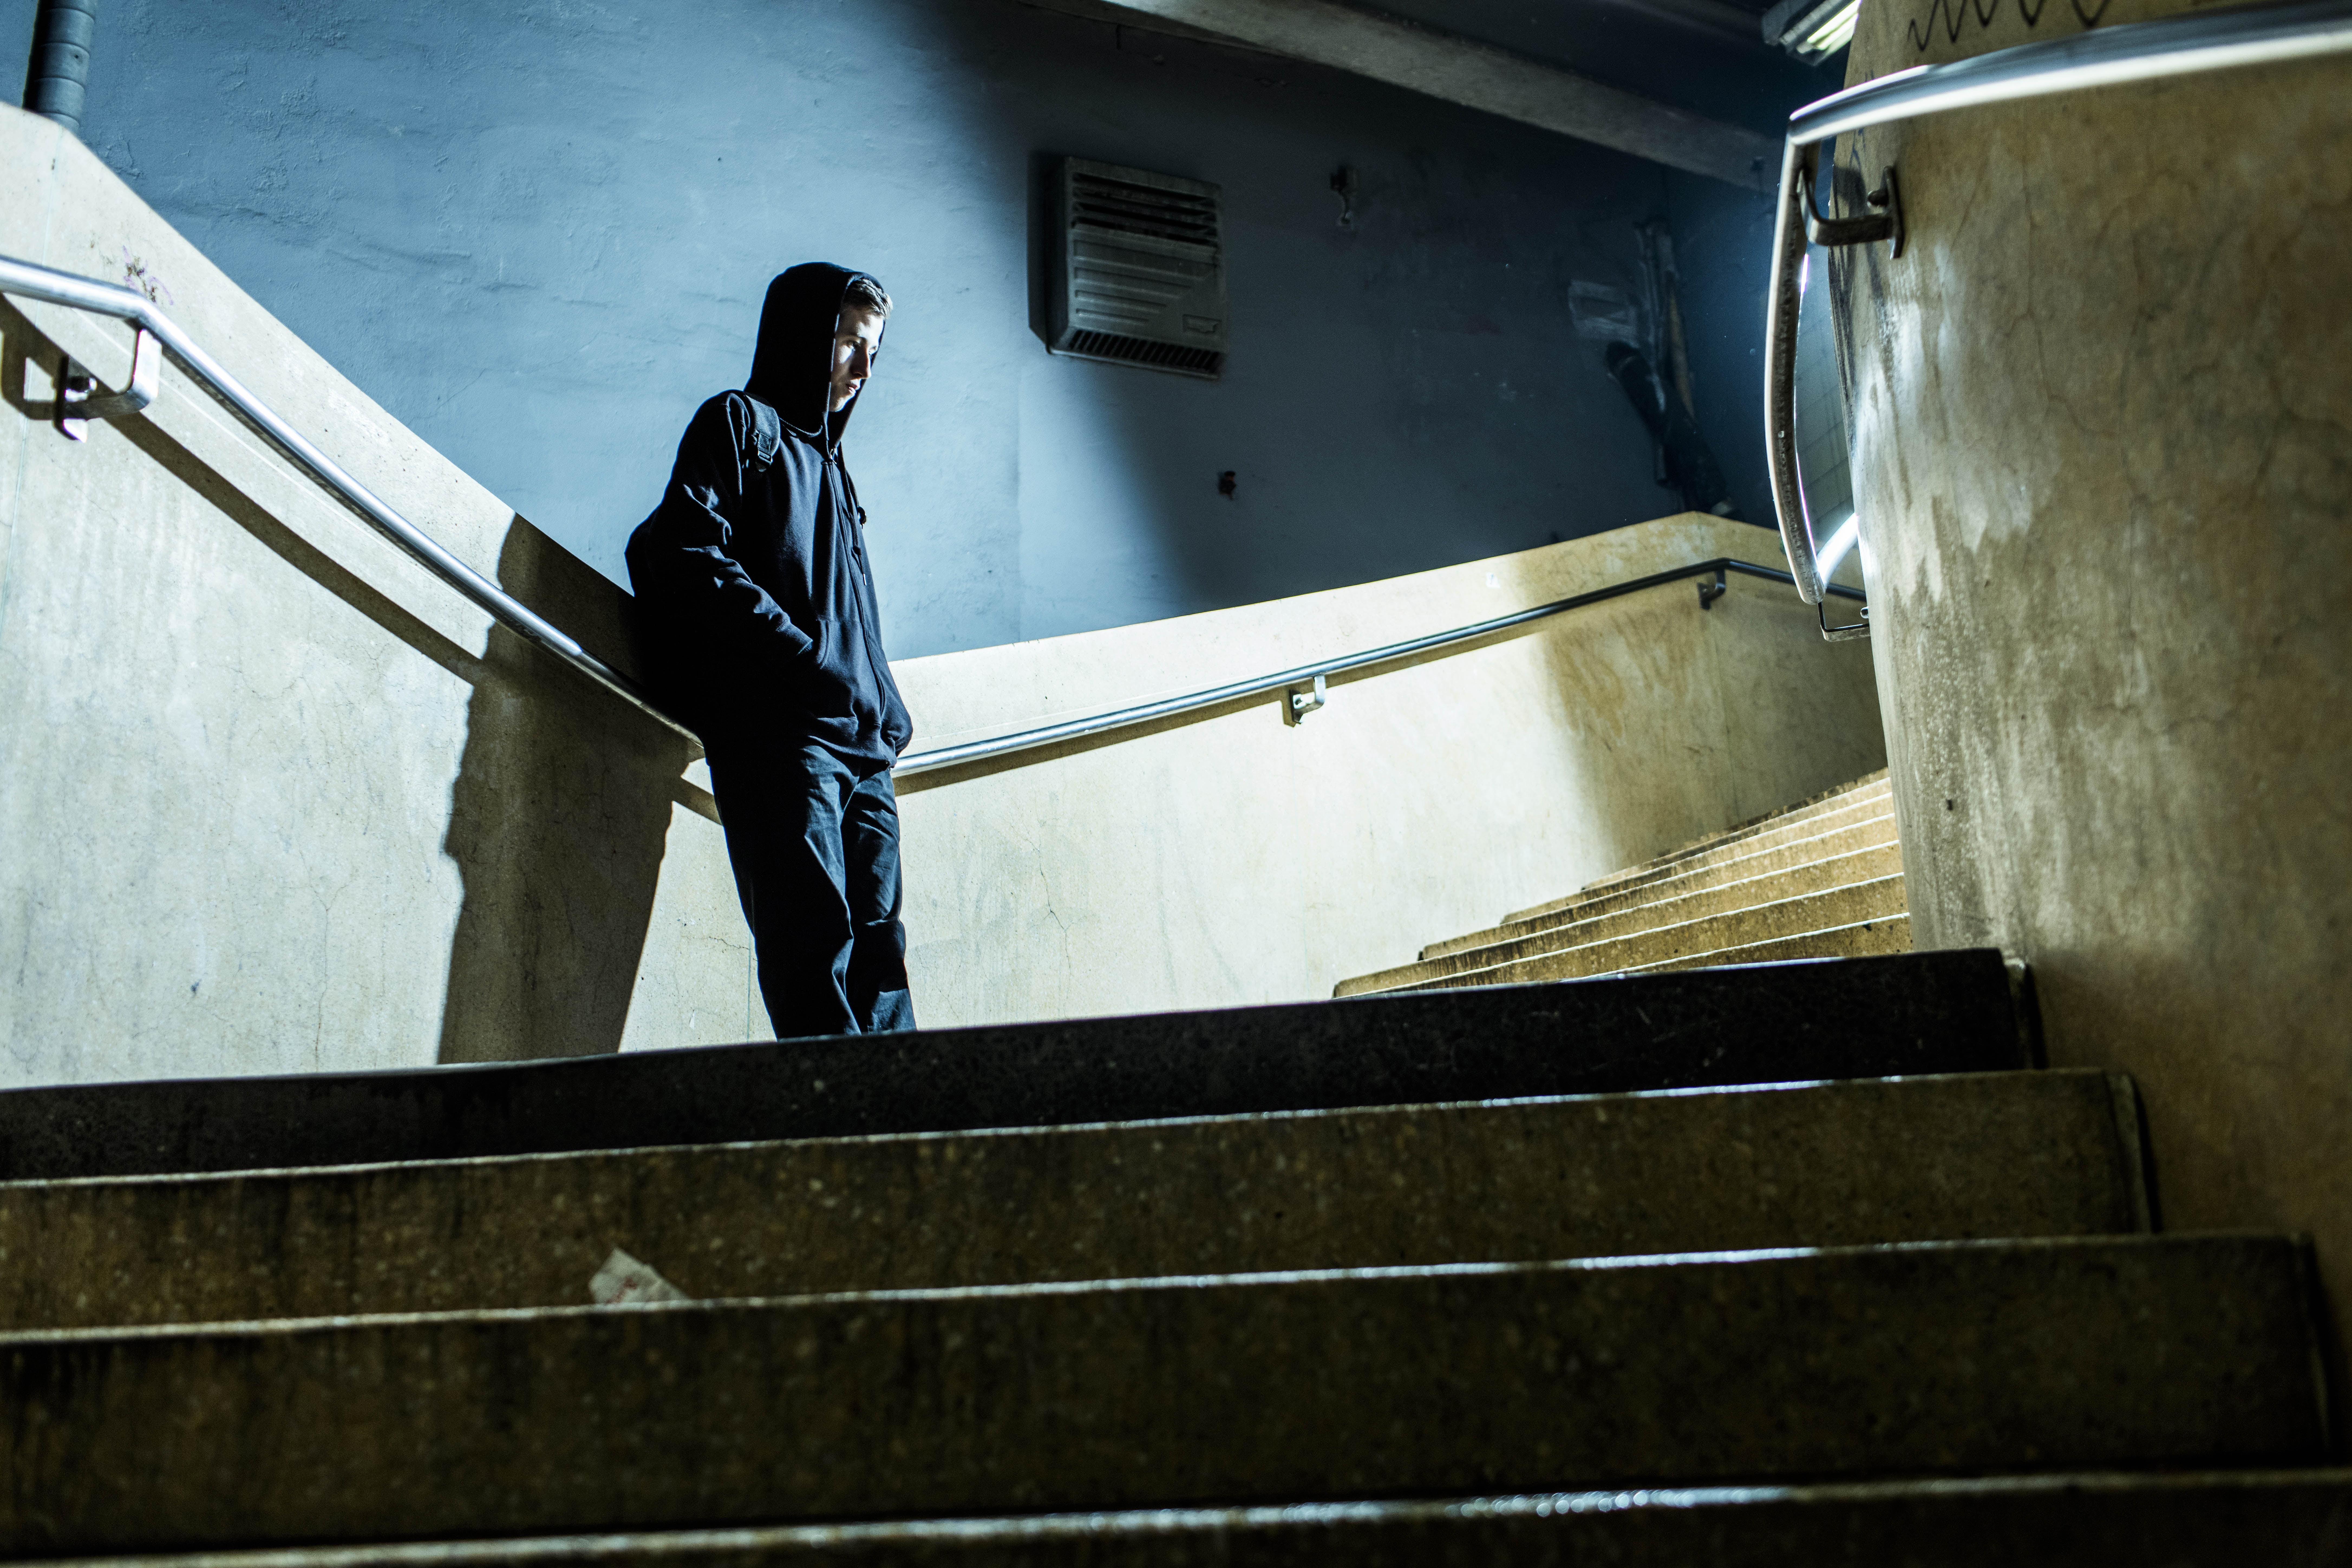 alan walker, dj, music, 4k, hd, architecture, one person, staircase